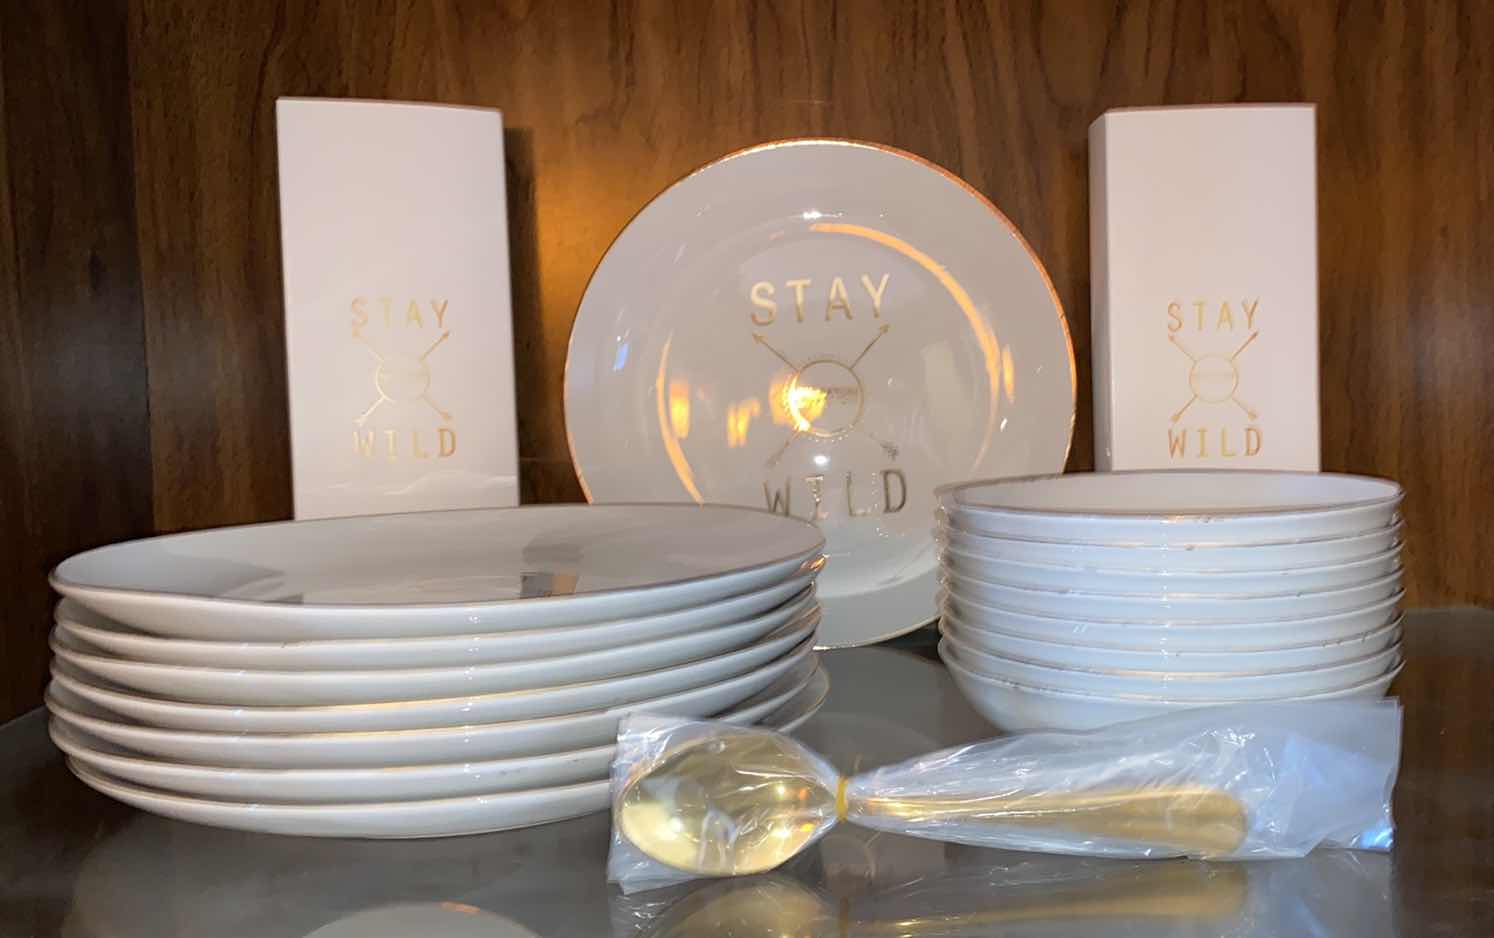 Photo 1 of 16PCS-STAY WILD FROM SILVERTON DISHES & 32PCS FOLD TONE SILVERWARE